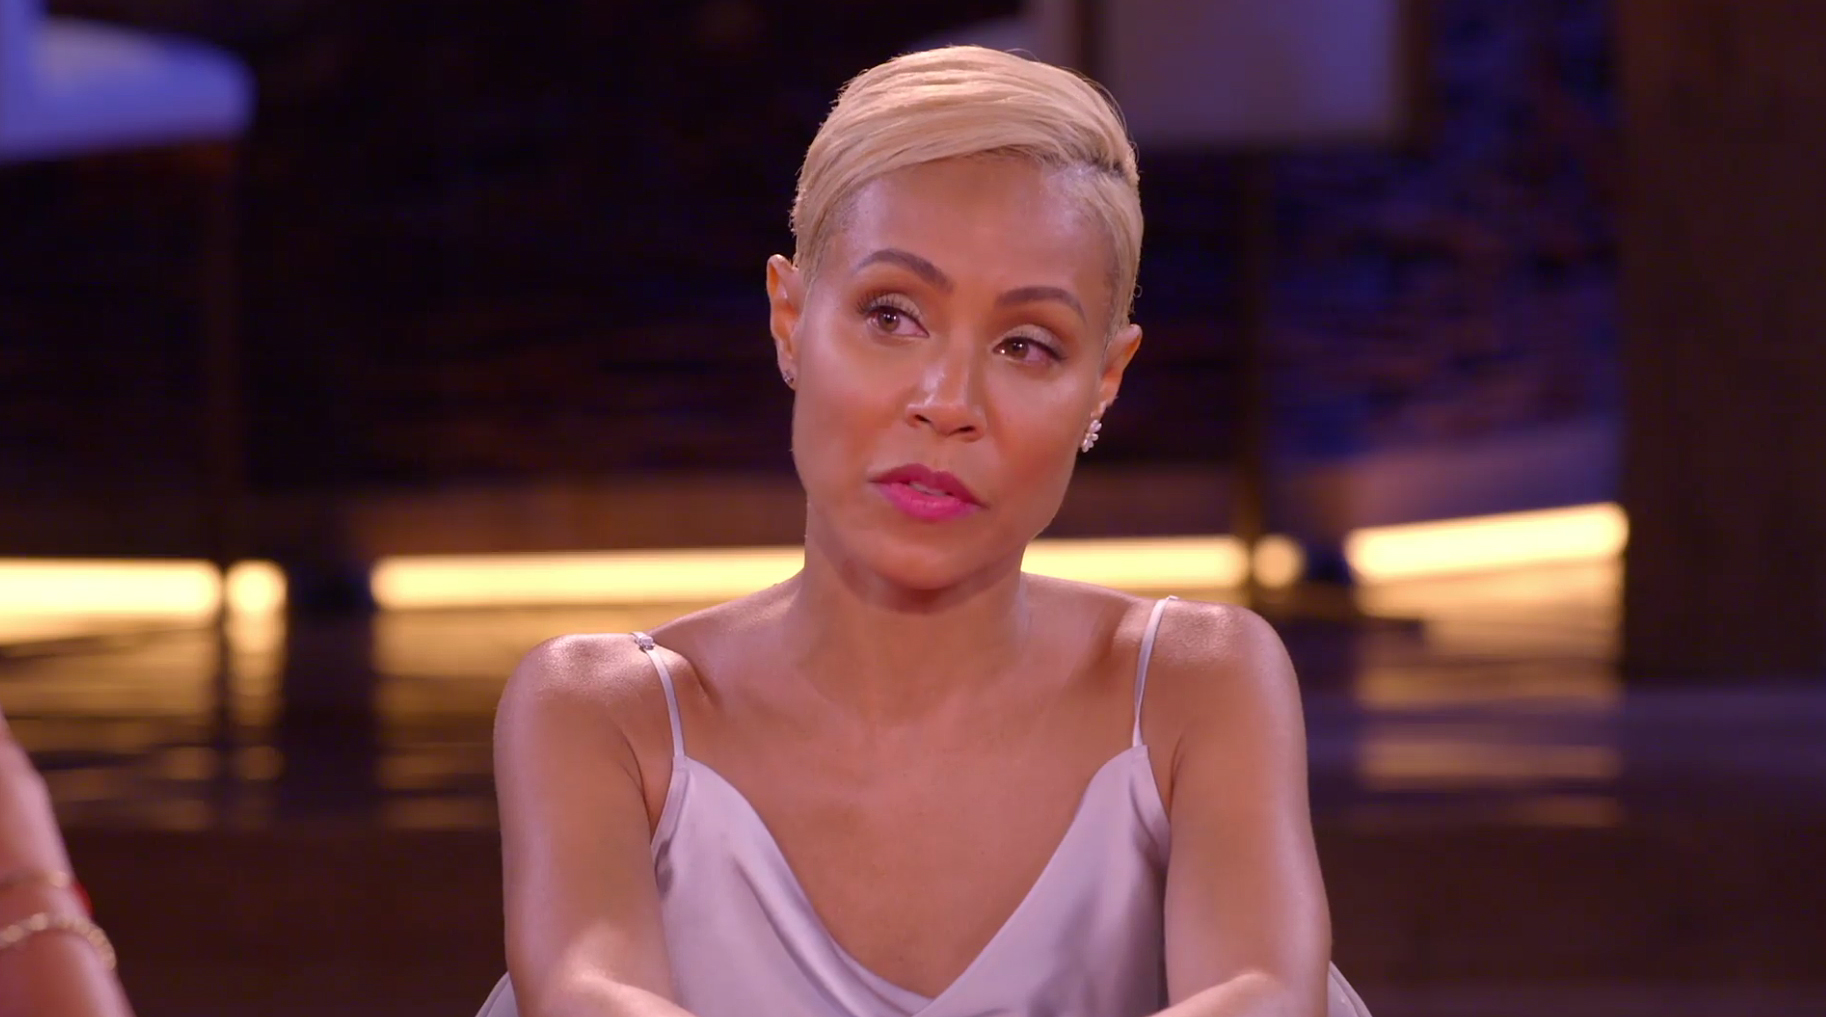 1826px x 1017px - Jada Pinkett Smith Says She Had 'Unhealthy Relationship' With Porn